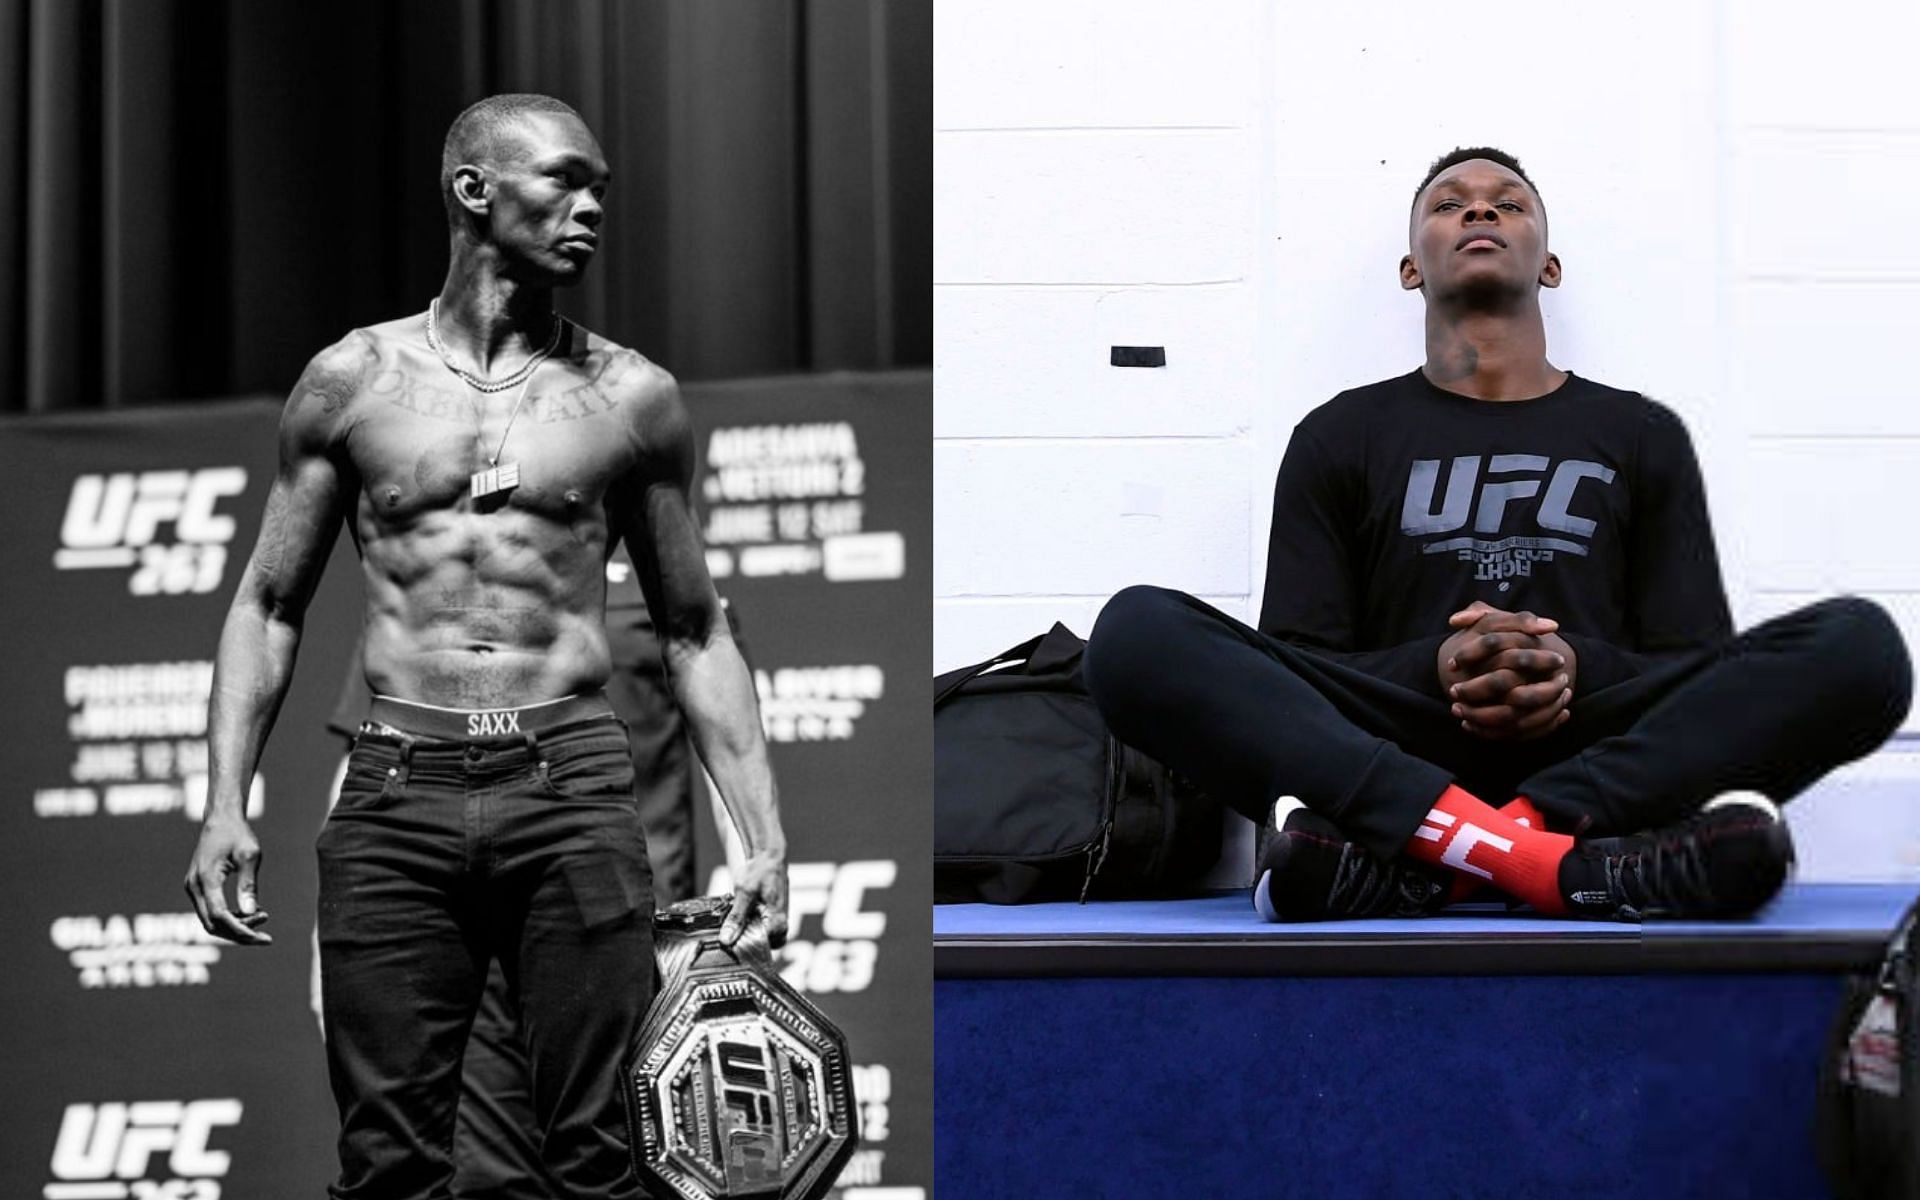 Israel Adesanya at UFC ceremonial weigh-in (left) [Image courtesy: @stylebender on Instagram]  and Adesanya before a fight (right) 